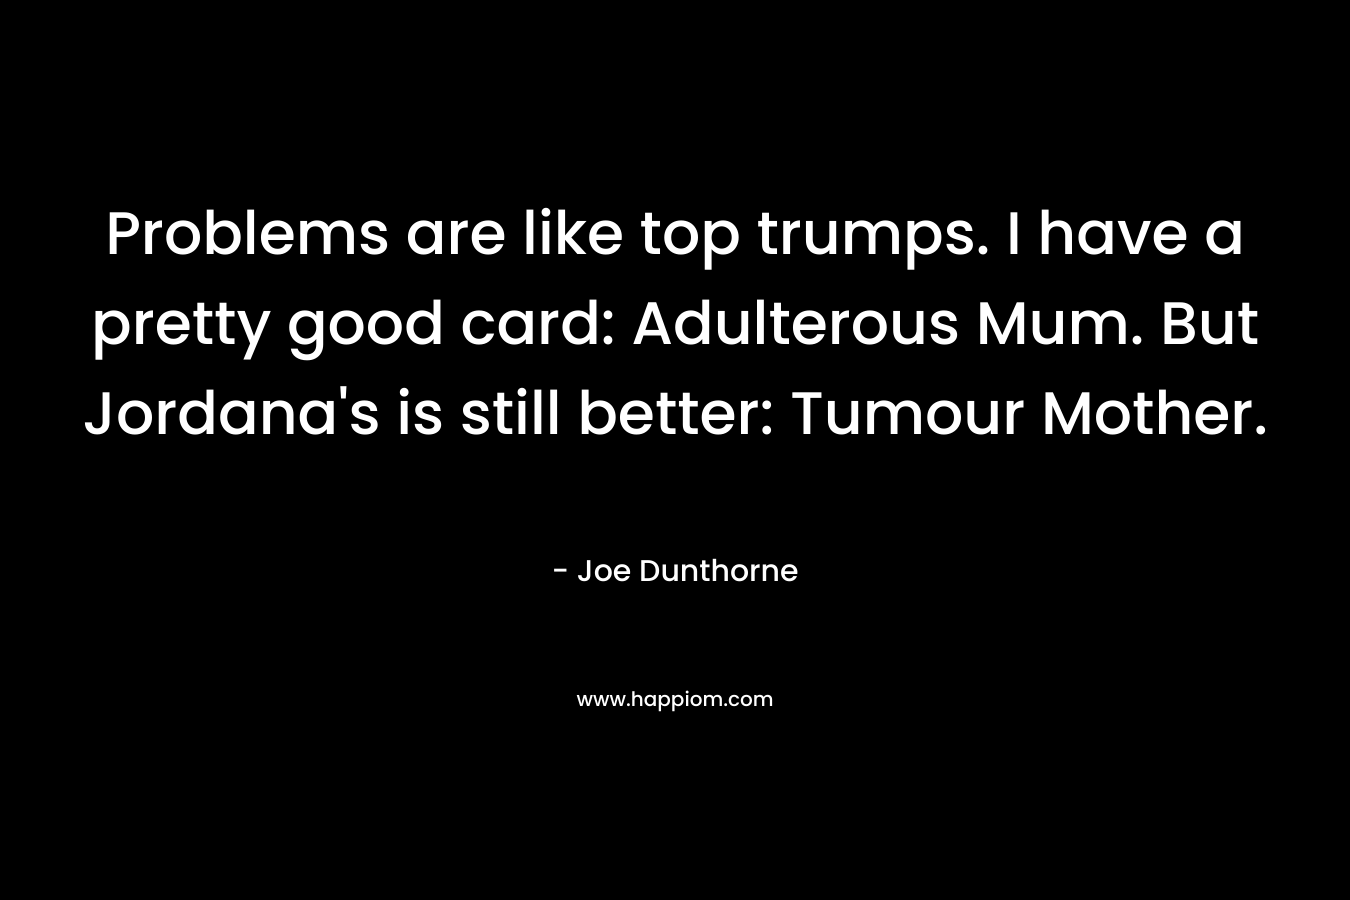 Problems are like top trumps. I have a pretty good card: Adulterous Mum. But Jordana’s is still better: Tumour Mother. – Joe Dunthorne